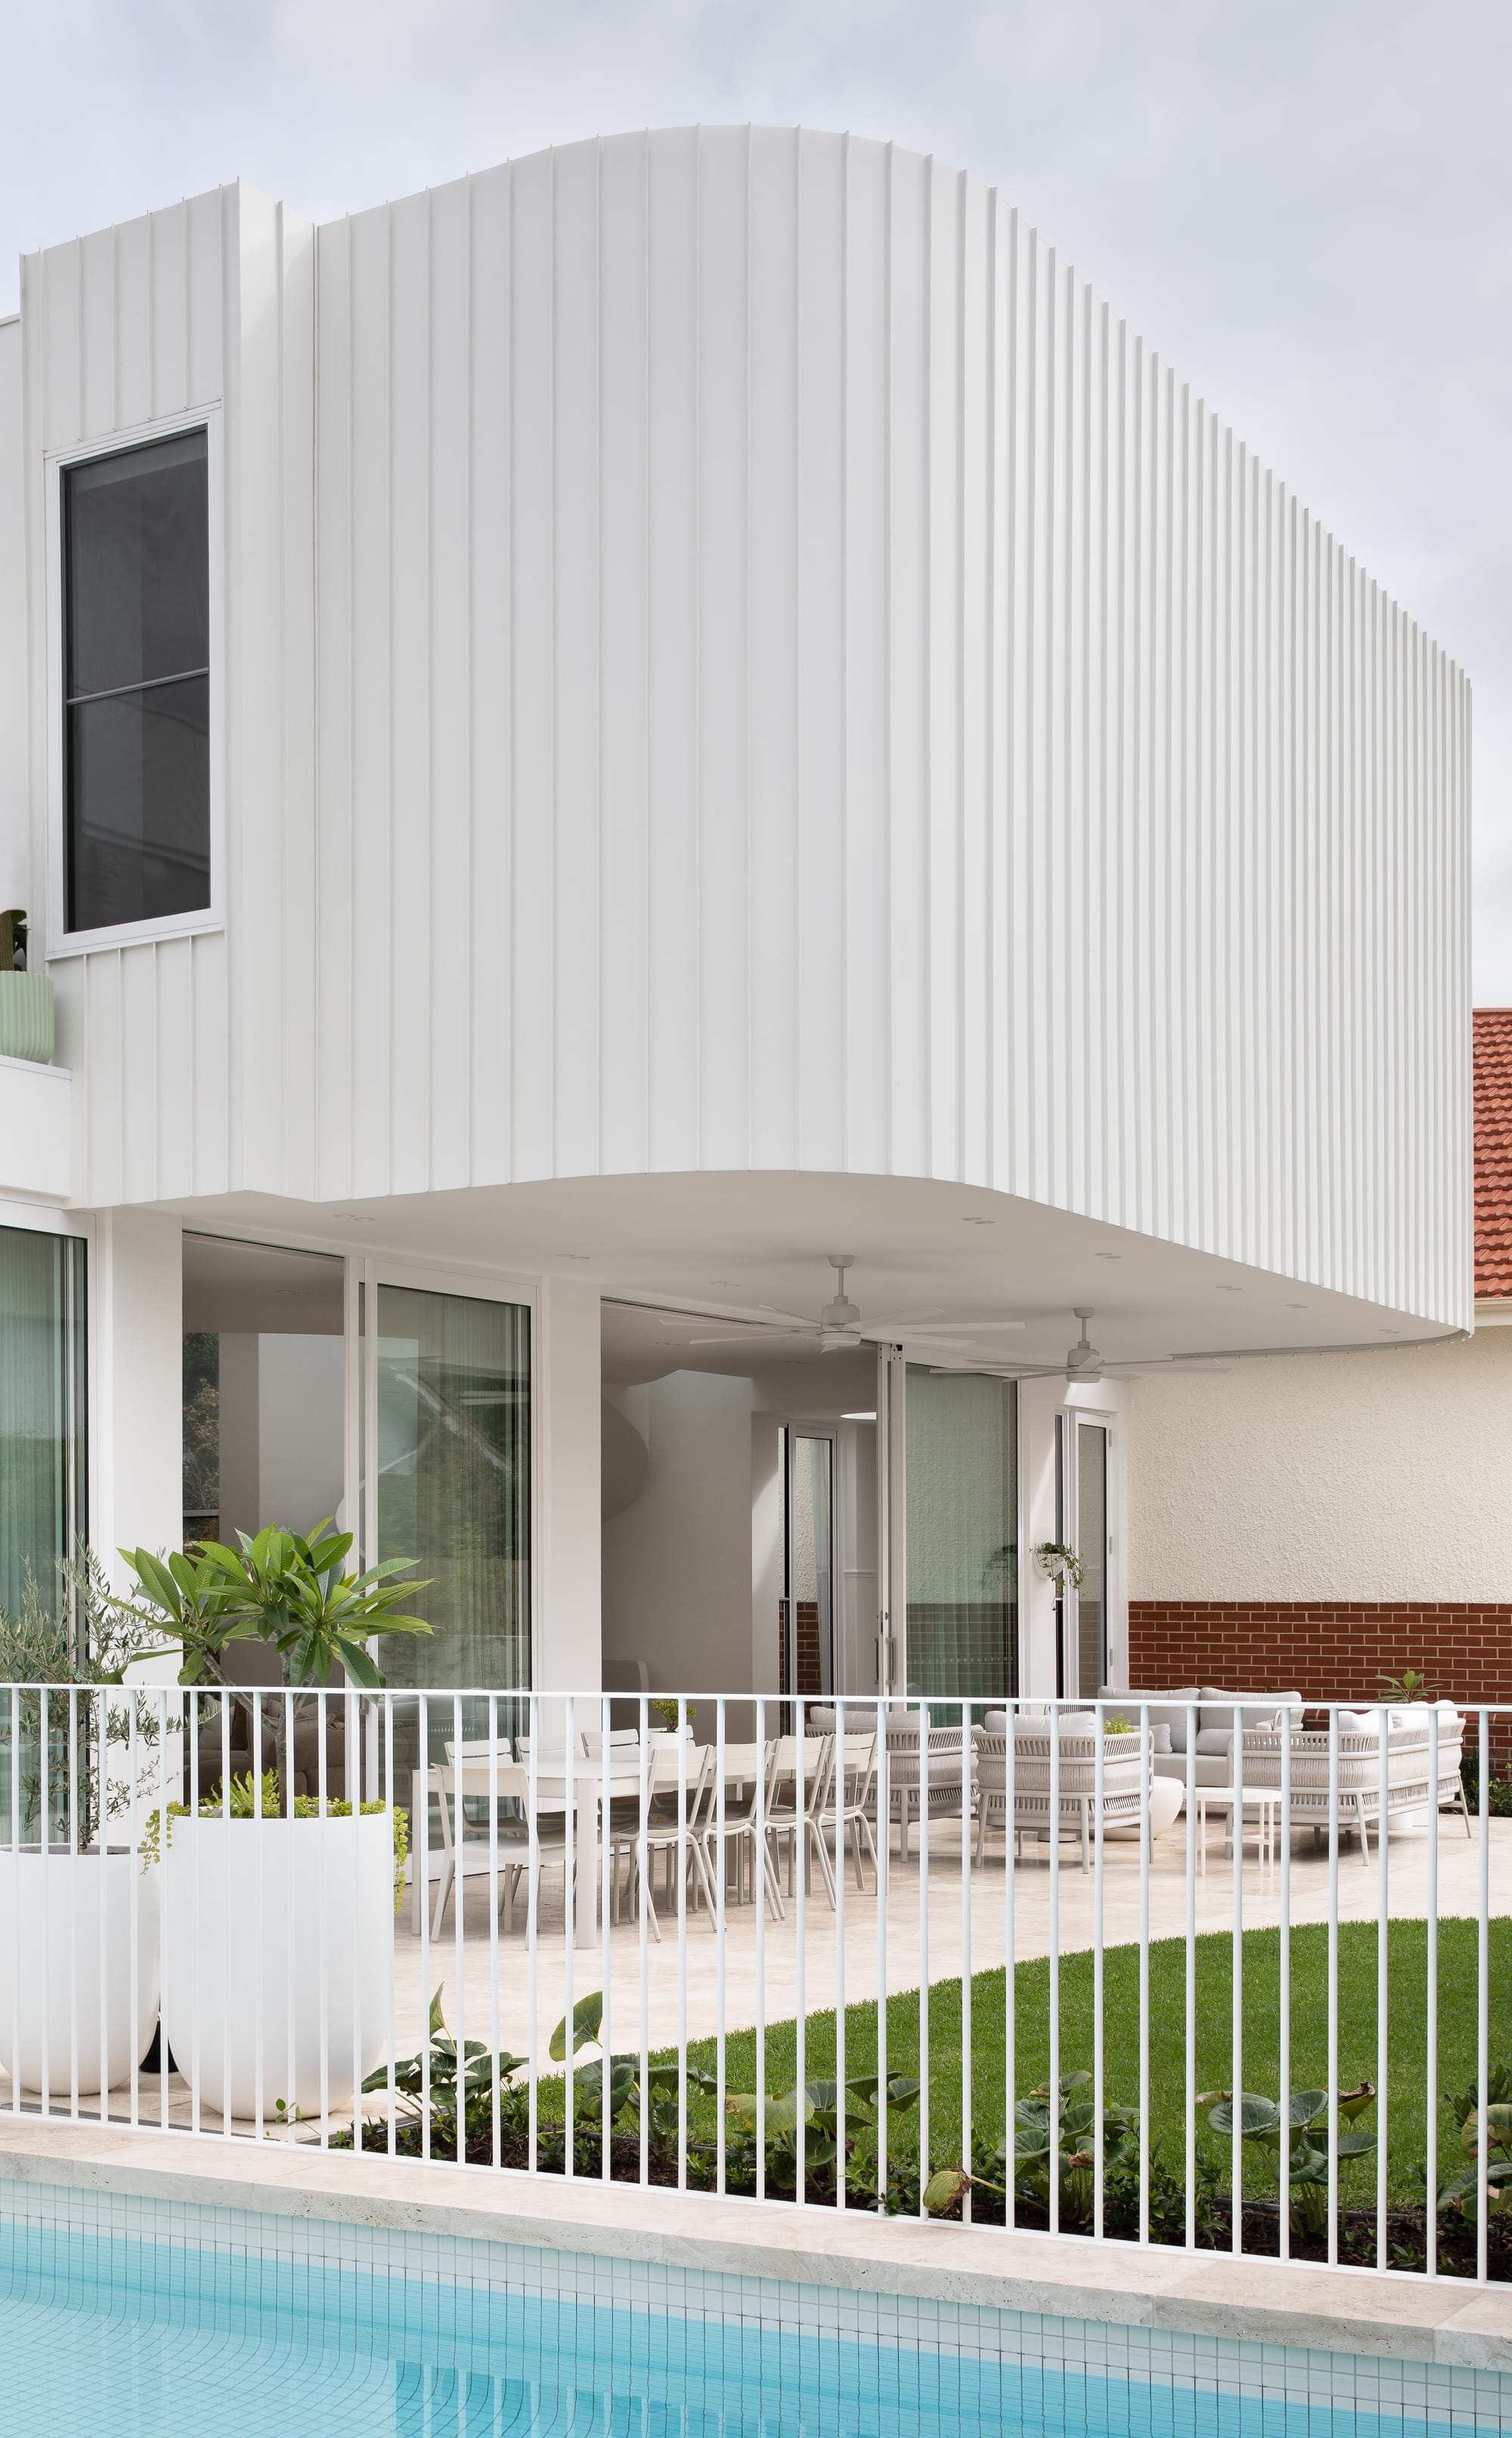 The Grove by Taouk Architects. A modern two-story house with a flat roof design and minimalist white facade. The ground floor features large glass windows and sliding doors that lead to a tiled patio with a swimming pool. A neat lawn and a white metal fence border the property.